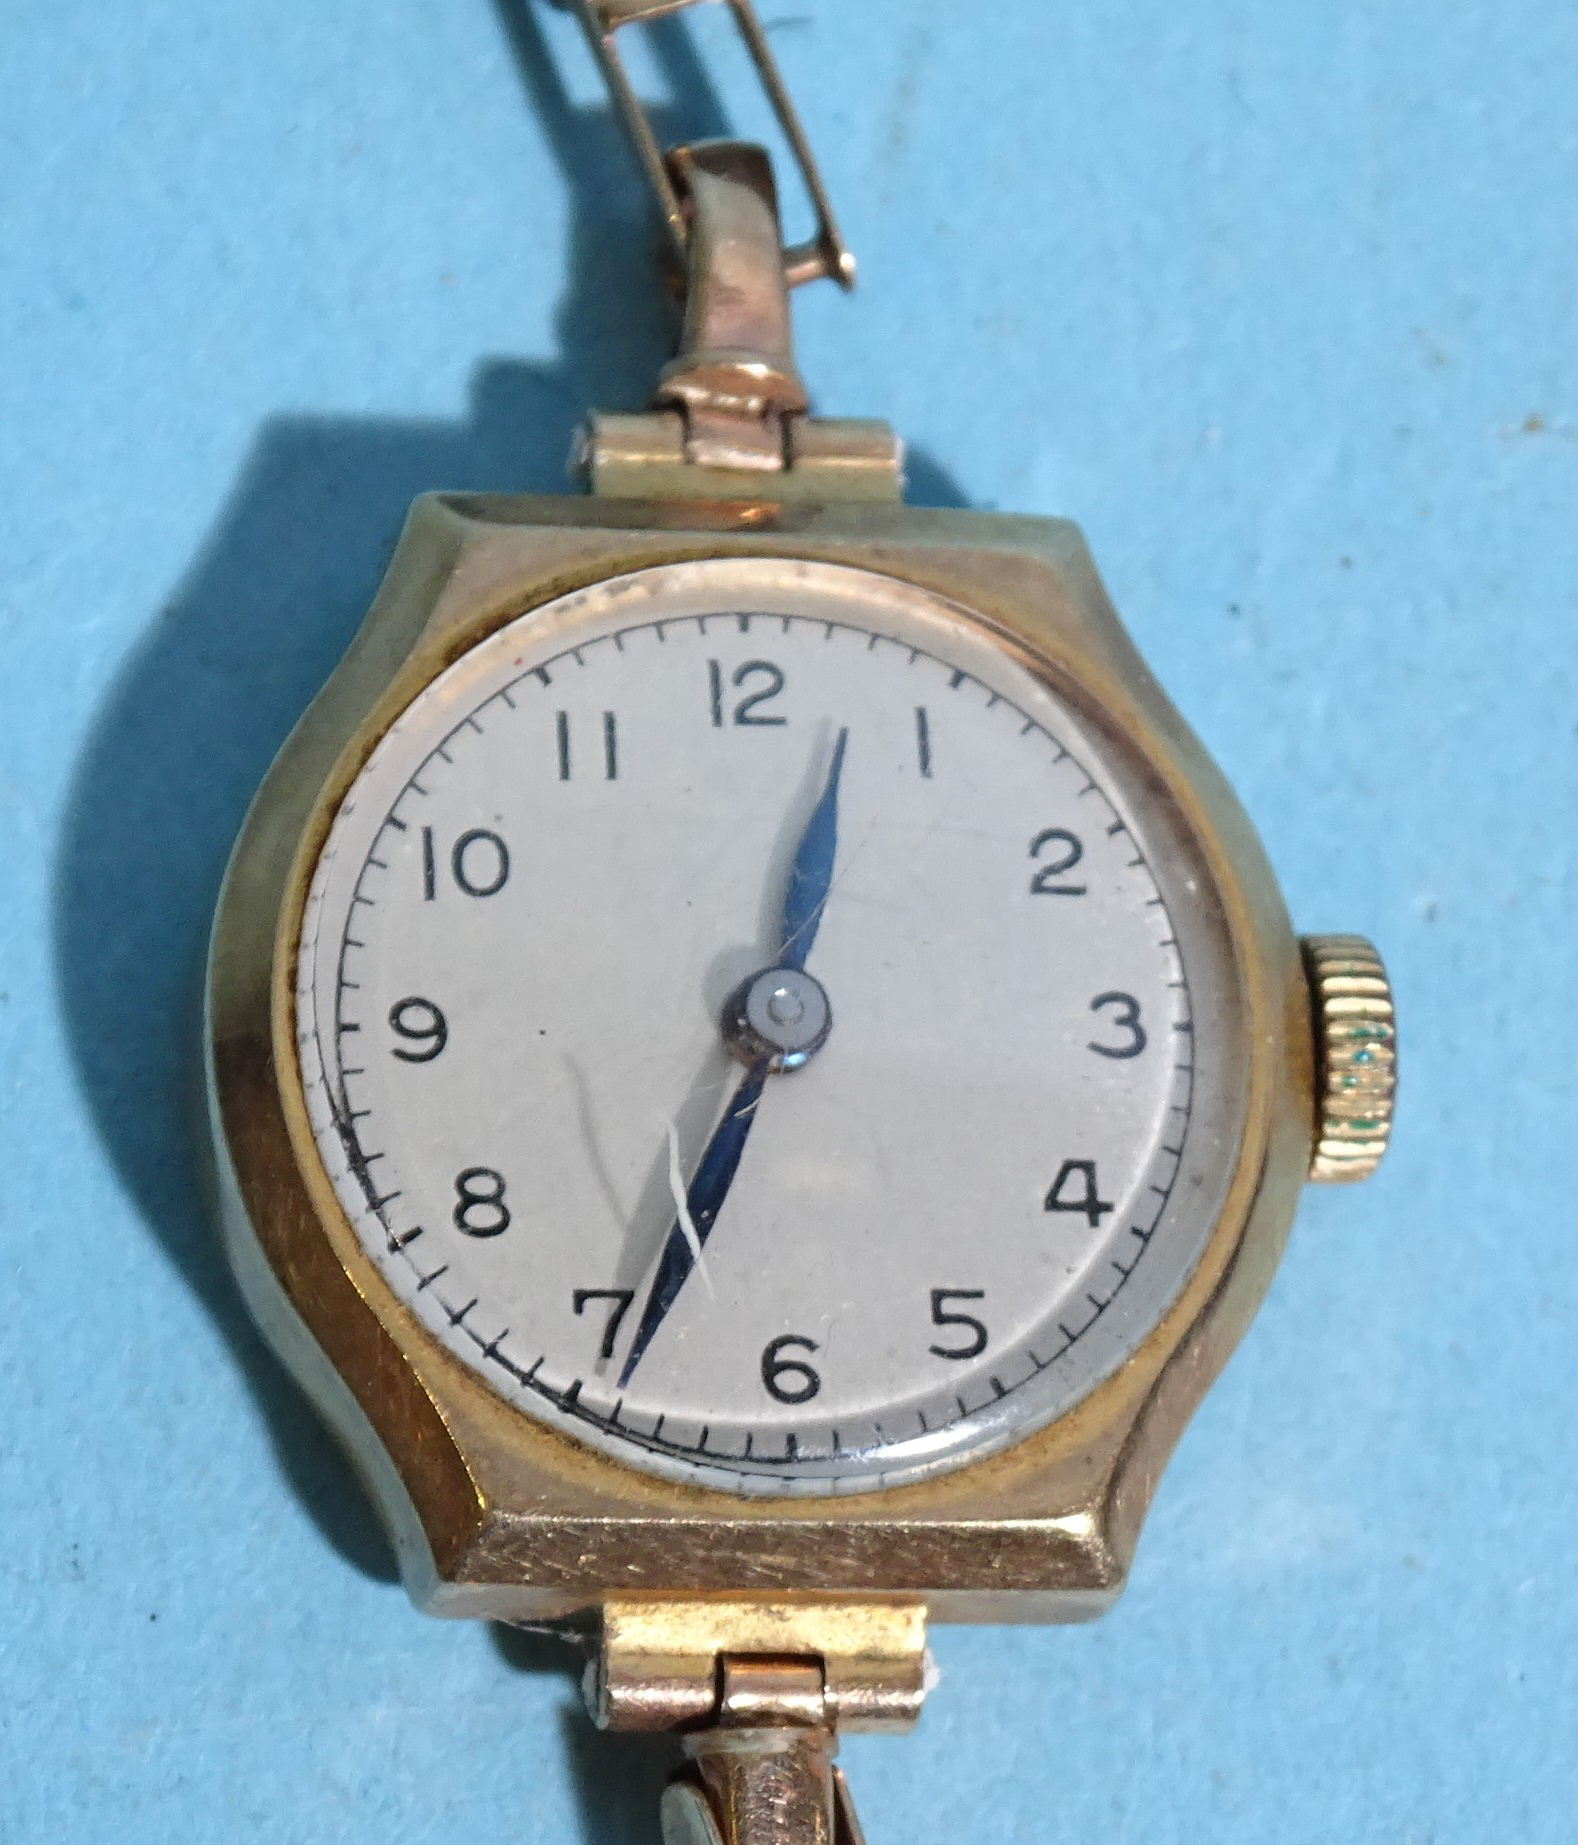 A lady's 9ct-gold-cased manual wrist watch, on 9ct gold sprung bracelet, (no clasp), 12.7g.